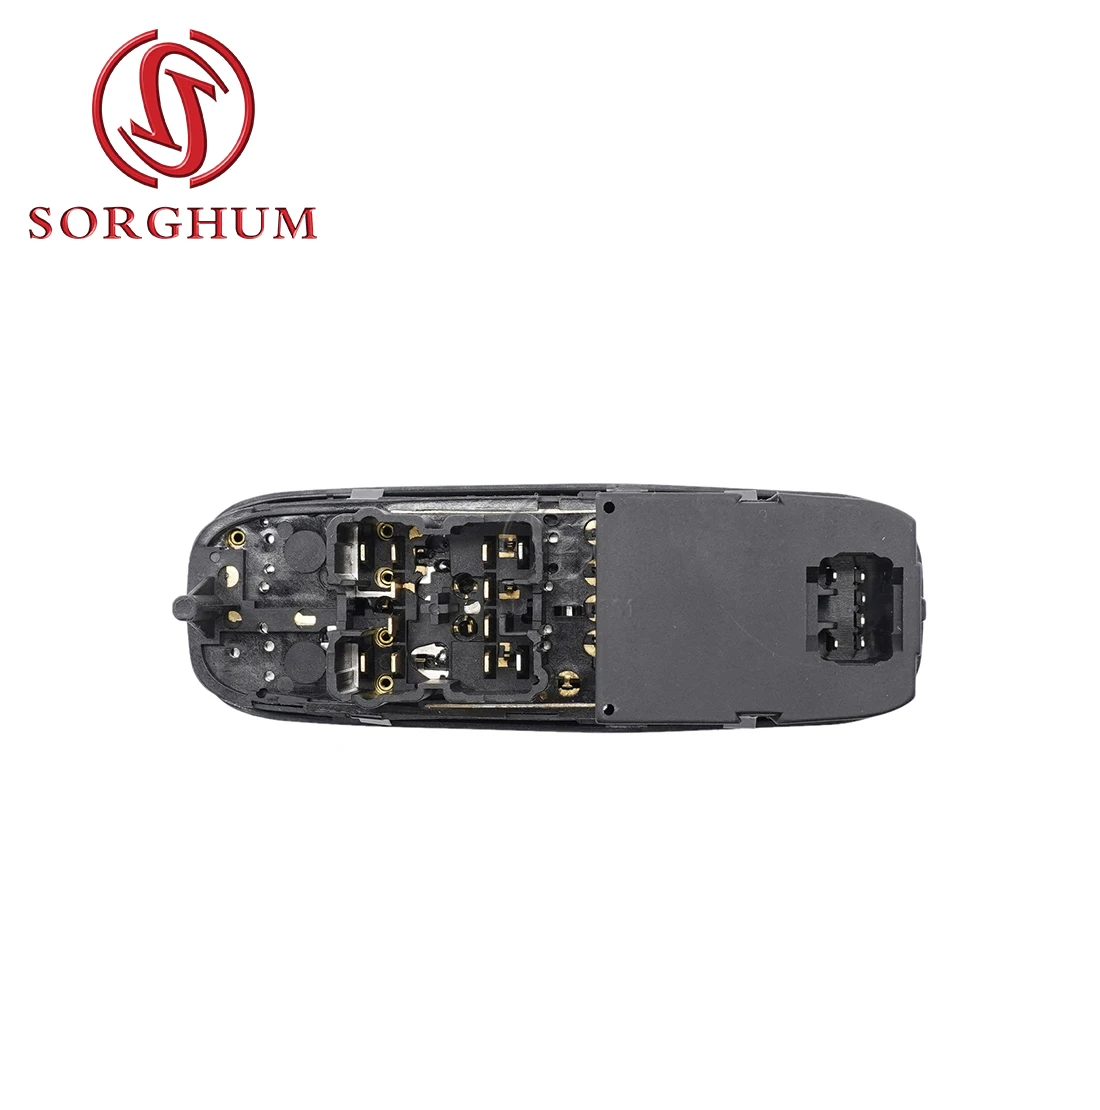 Sorghum 8638452 Auto Front Left Electric Power Window Control Master Switch Button For Volvo V70 S70 XC70 1998 1999 2000 9472276 images - 6